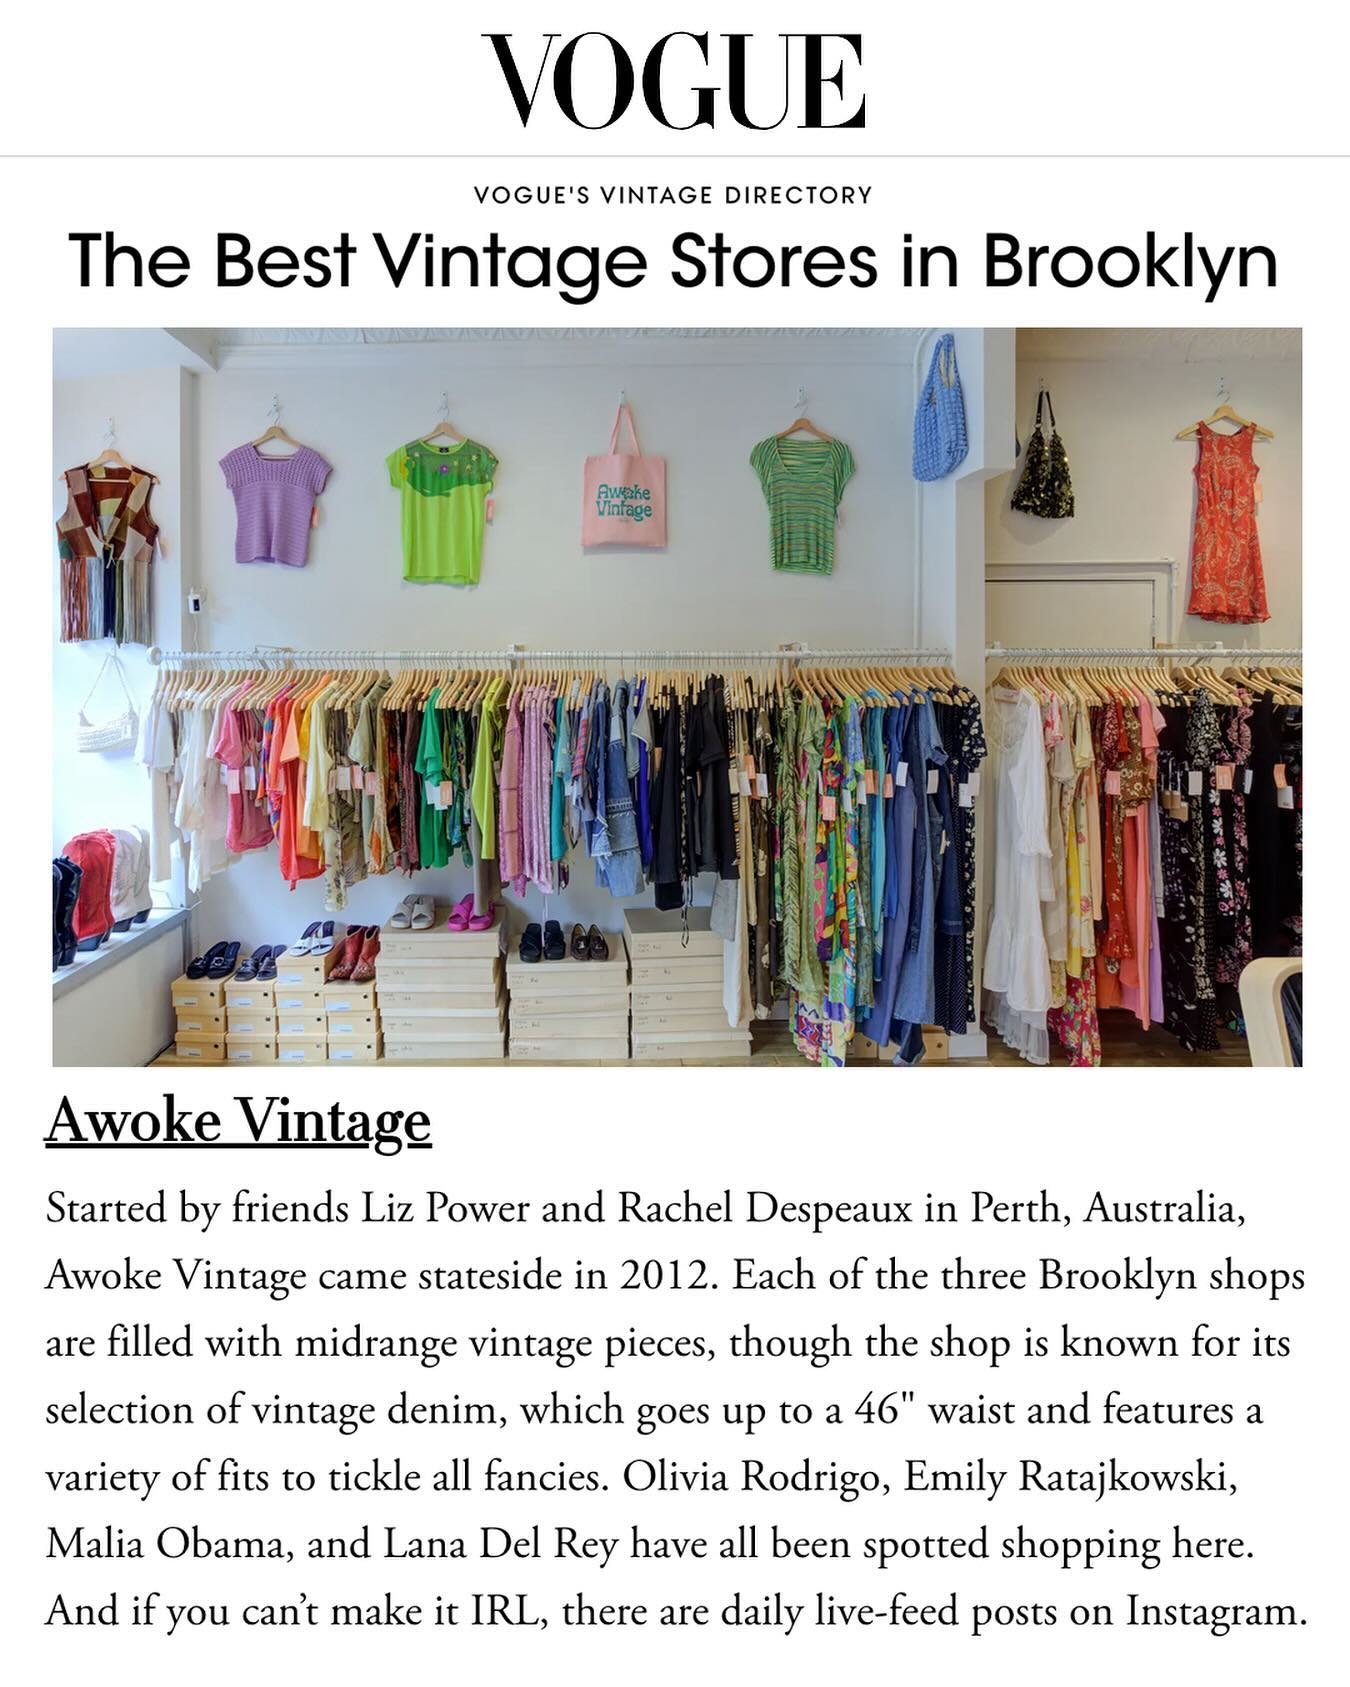 So grateful to be included in @voguemagazine Best Vintage Stores guide! If you haven&rsquo;t already, take a peek at their extensive city guides for the best vintage from Dallas to Copenhagen! Special shoutout to @margaux_polaux for the feature 🫶🥹?